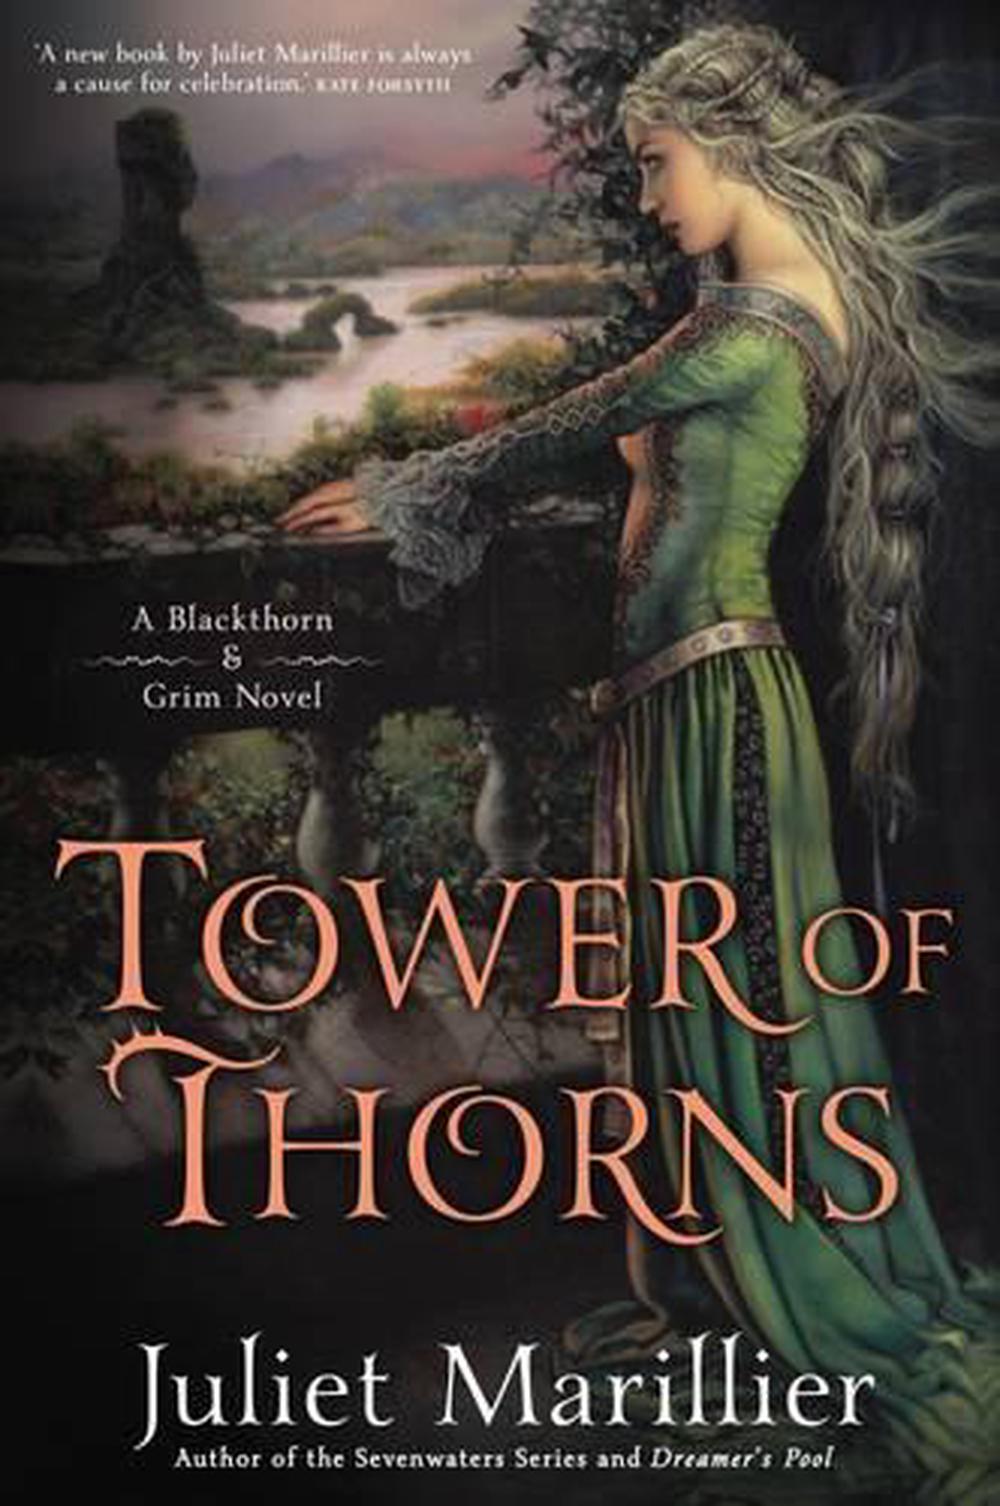 tower of thorns by juliet marillier